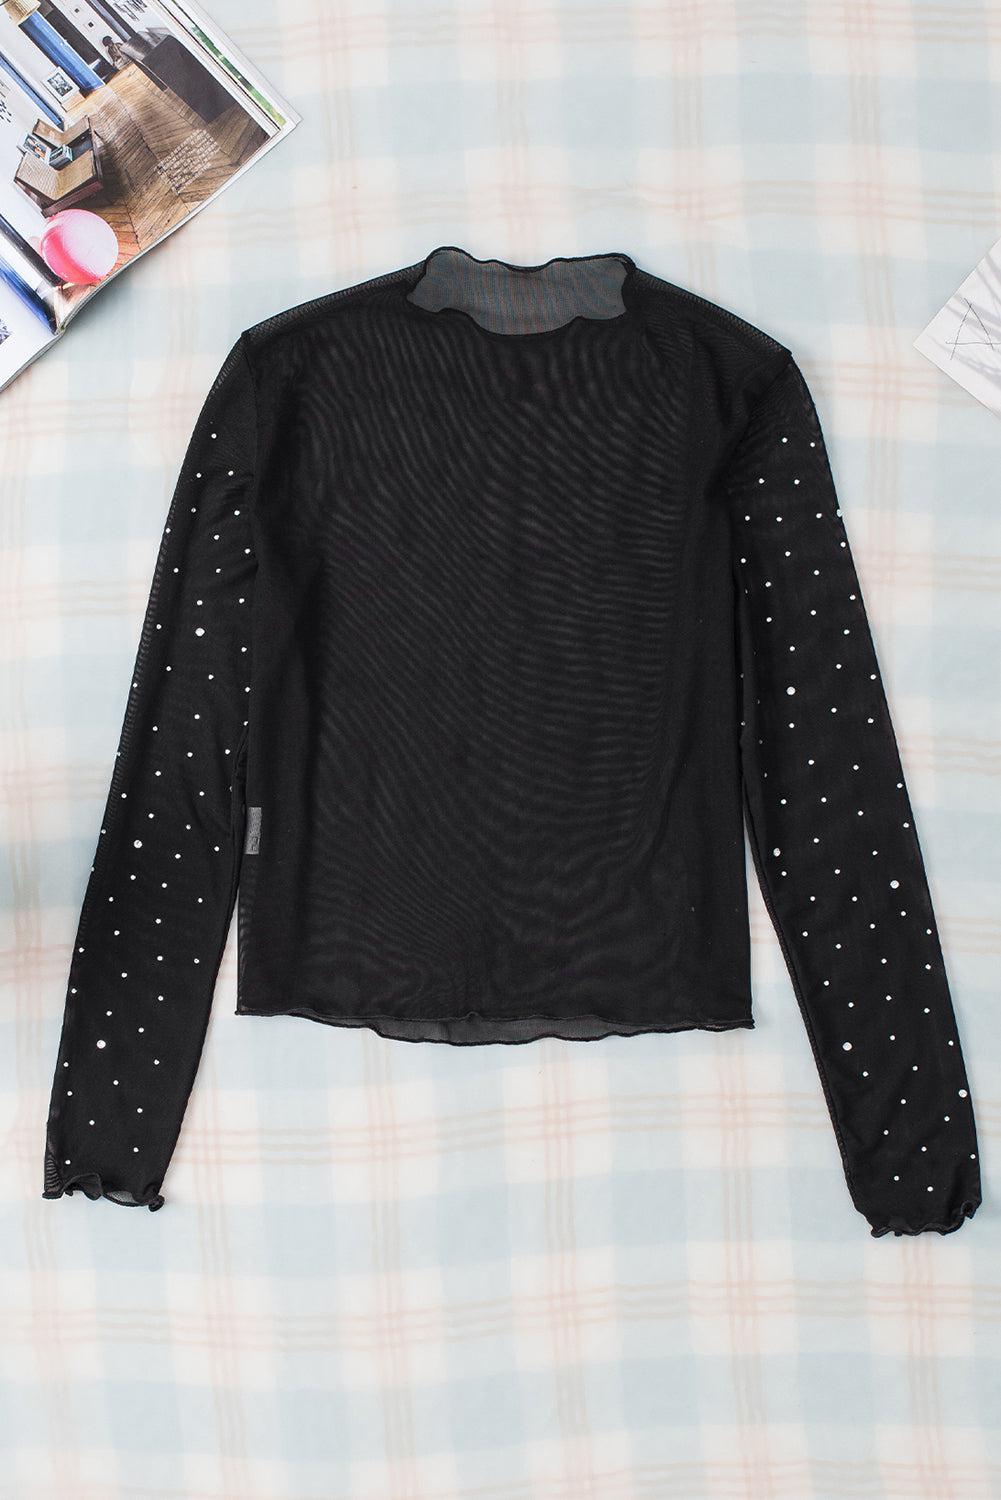 a black sweater with silver polka dots on it